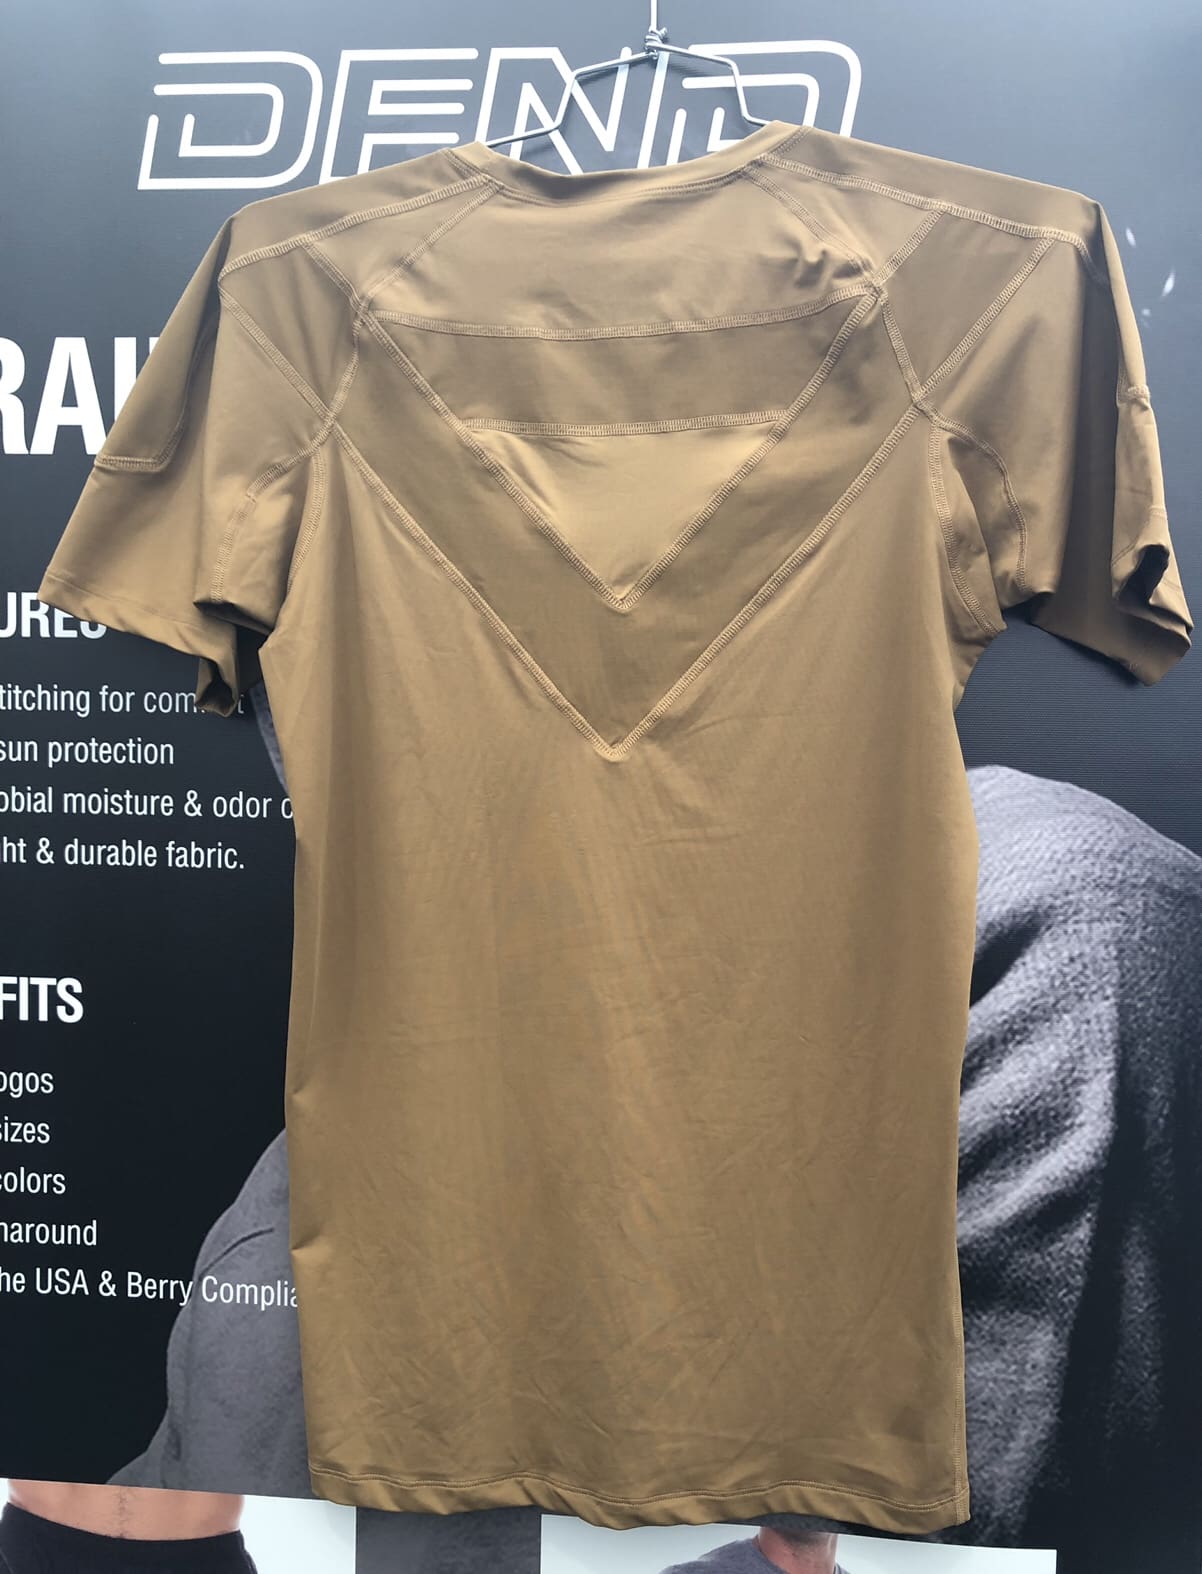 coyote brown compression shirt